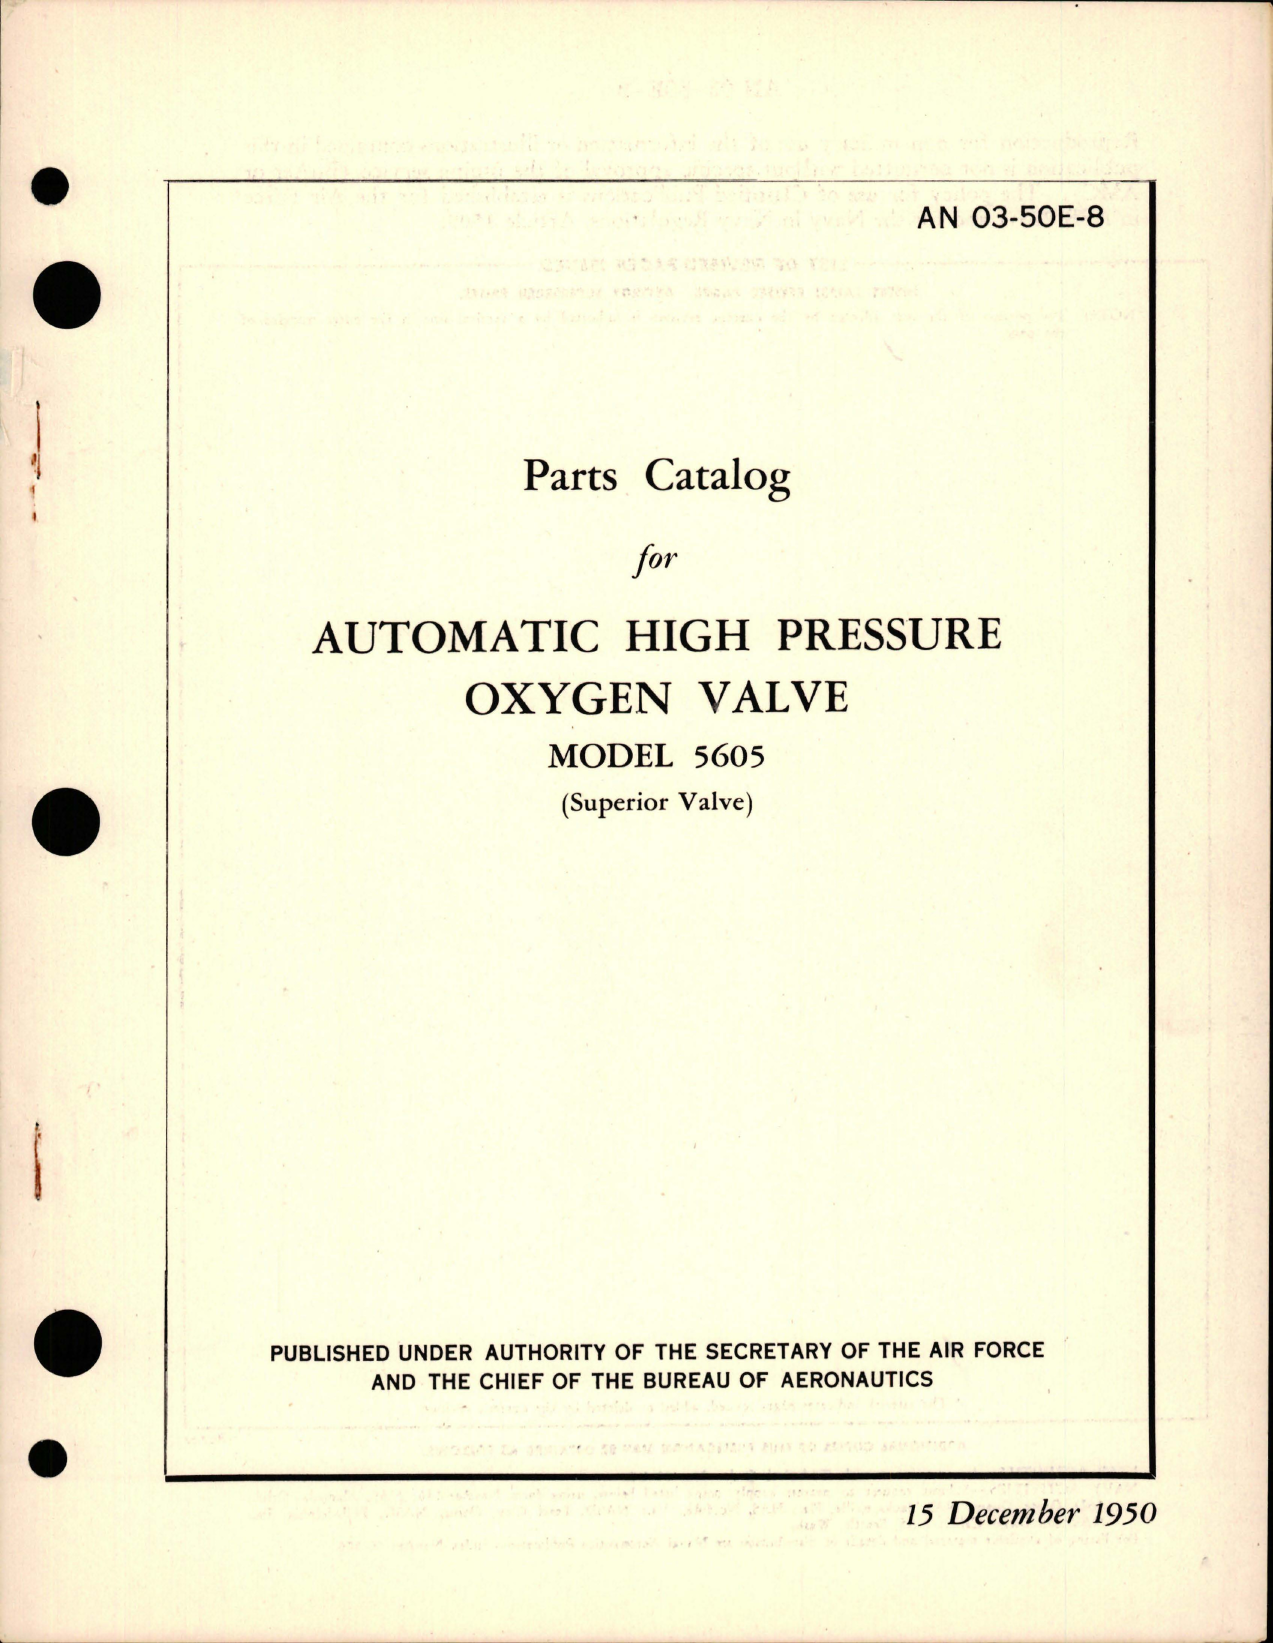 Sample page 1 from AirCorps Library document: Parts Catalog for Automatic High Pressure Oxygen Valve - Model 5605